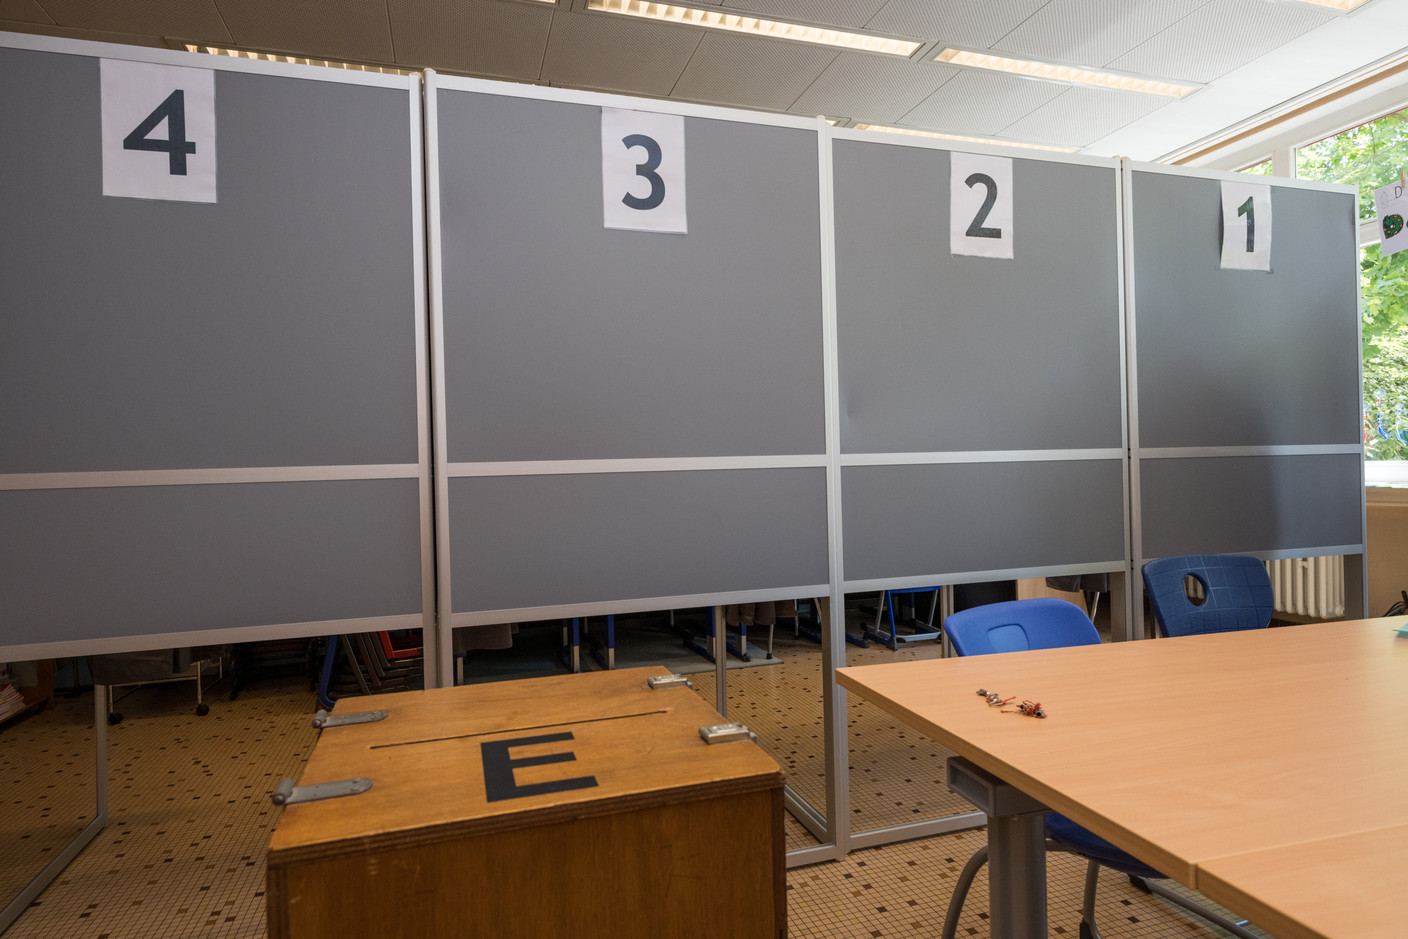 Polling place in Ettelbruck, seen during municipal elections, 11 June 2023. Photo: Nader Ghavami